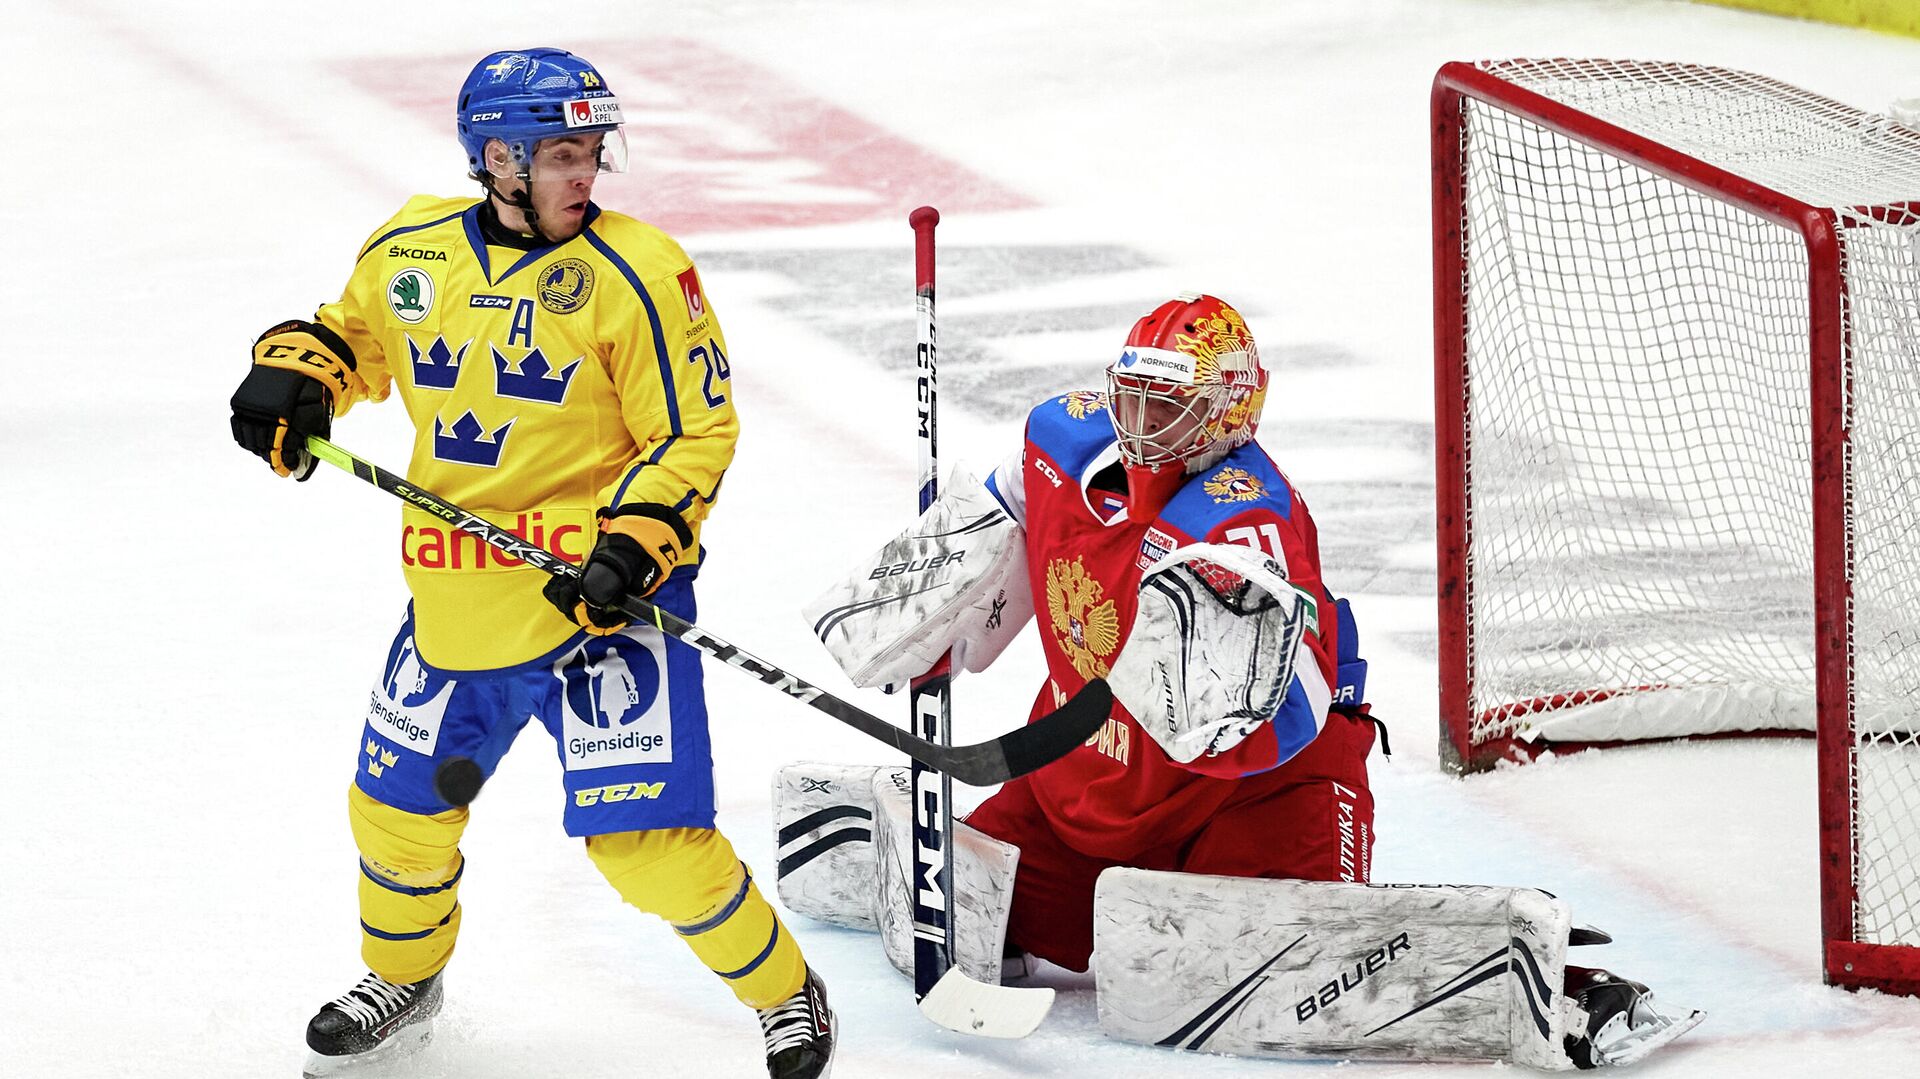 Sweden's Andreas Wingerli (L) and Russia's goalkeeper Alexander Samonov vie during the Beijer Hockey Games (Euro Hockey Tour) ice hockey match between Sweden and Russia in Malmo on February 13, 2021. (Photo by Anders Bjuro / TT NEWS AGENCY / AFP) / Sweden OUT - РИА Новости, 1920, 13.02.2021